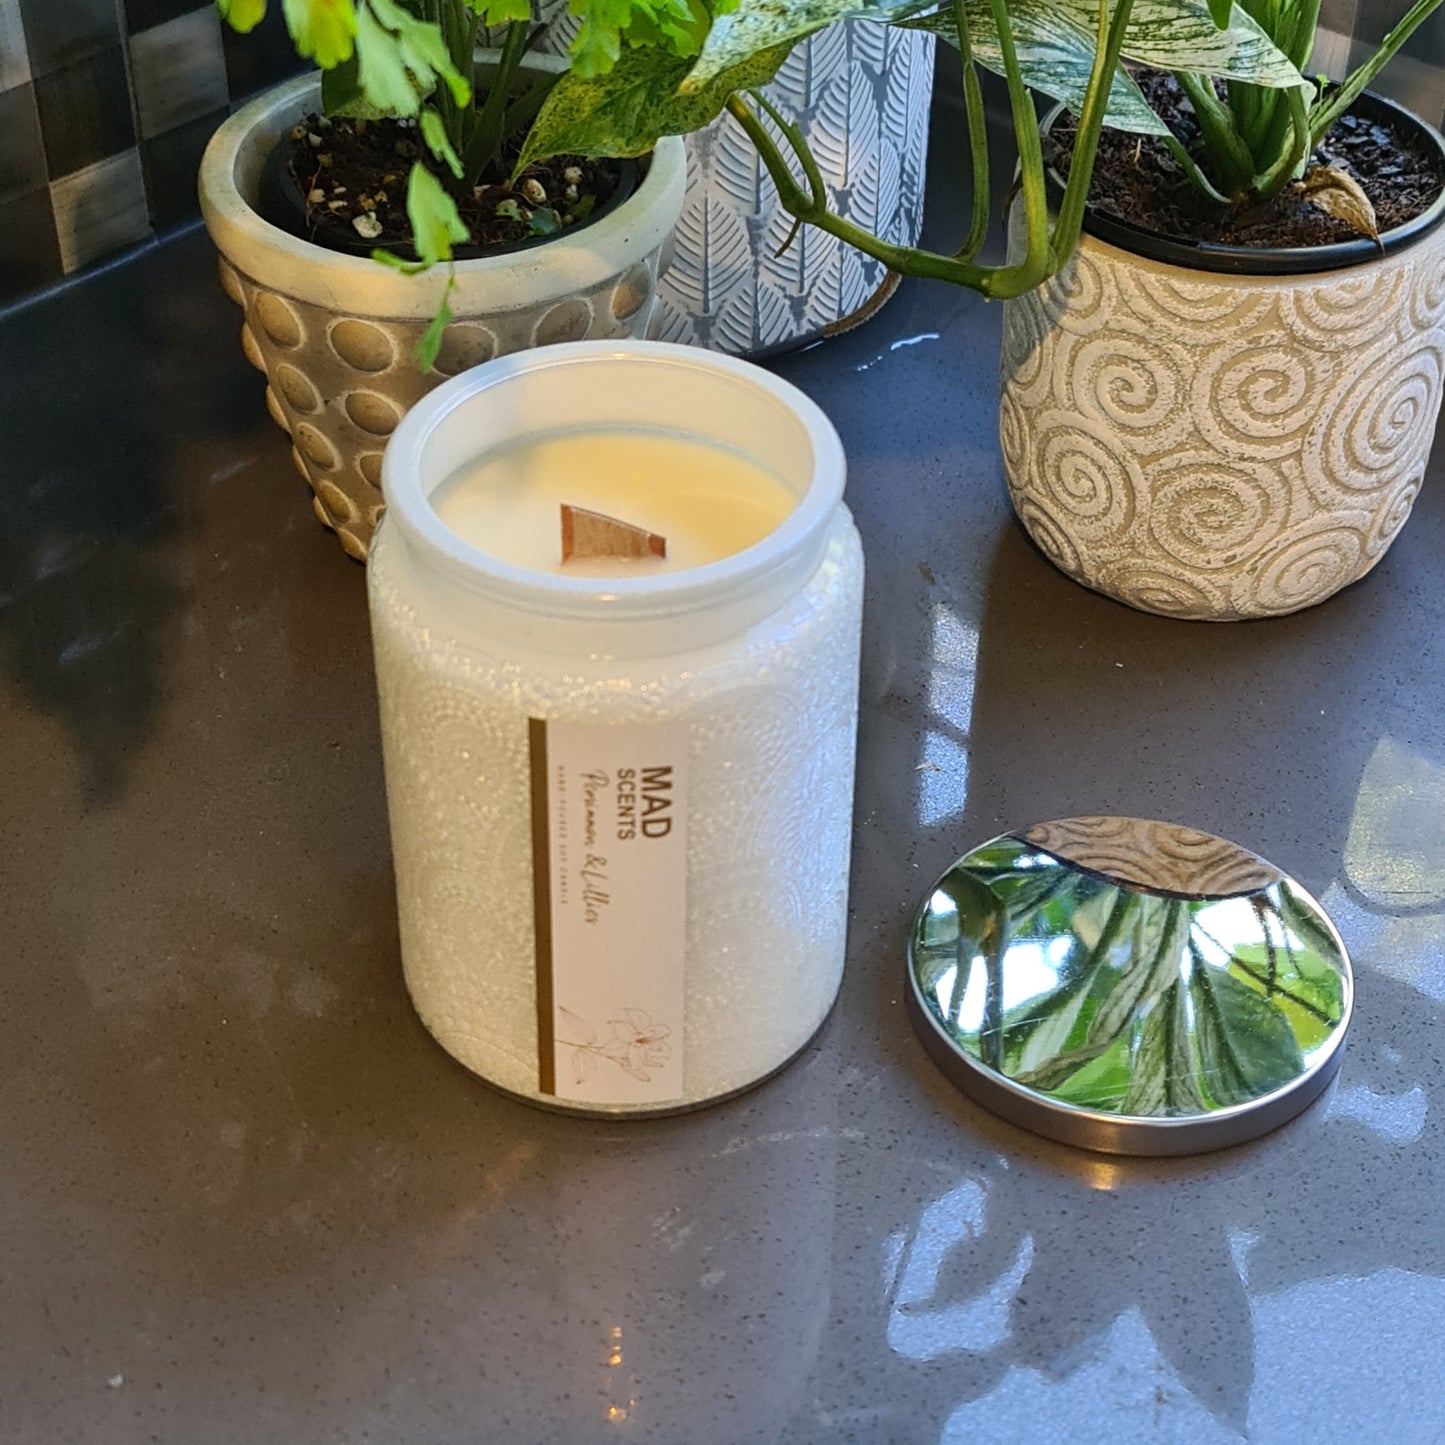 Wood Wick Homestyle Candle - Persimmon & Lillies